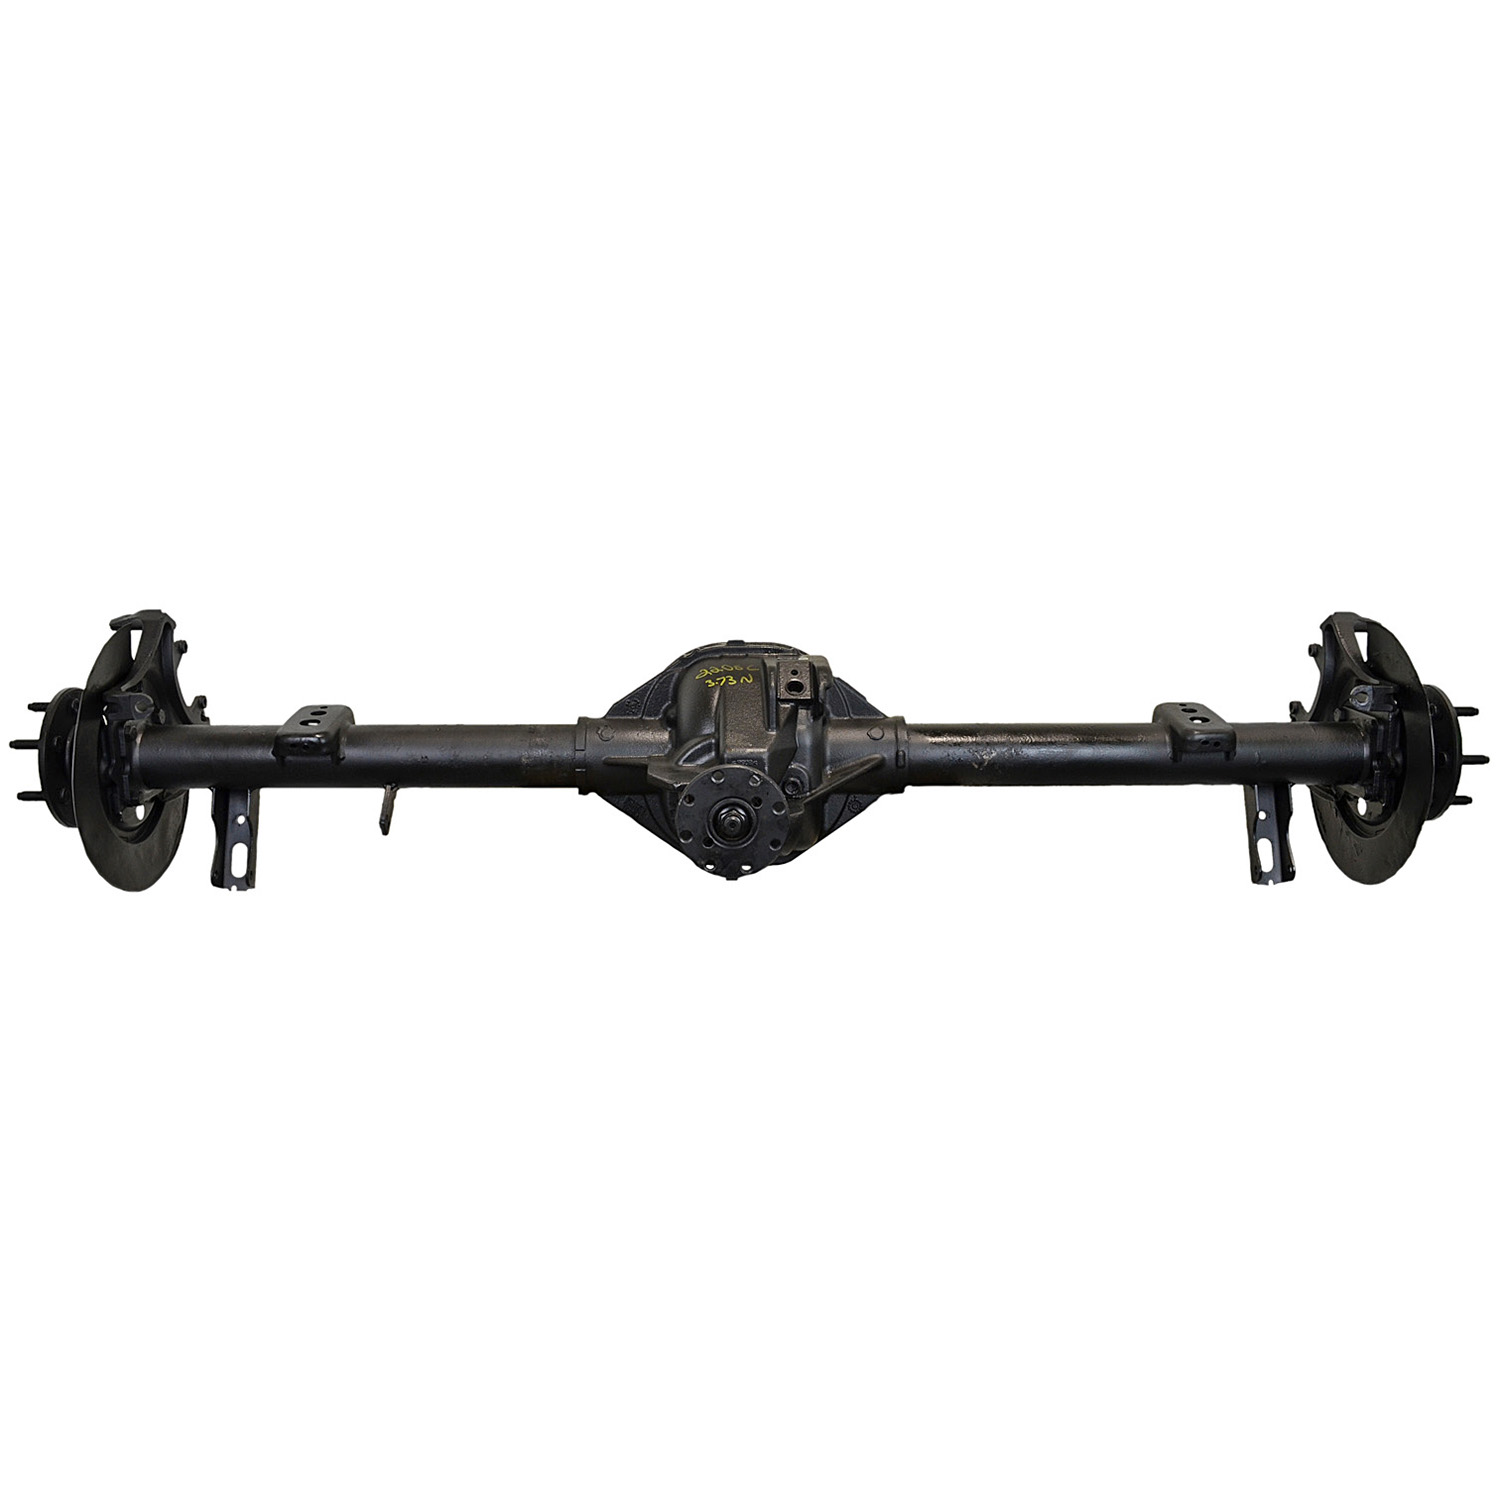 FORD F-150 LCK 5.13 AXLE